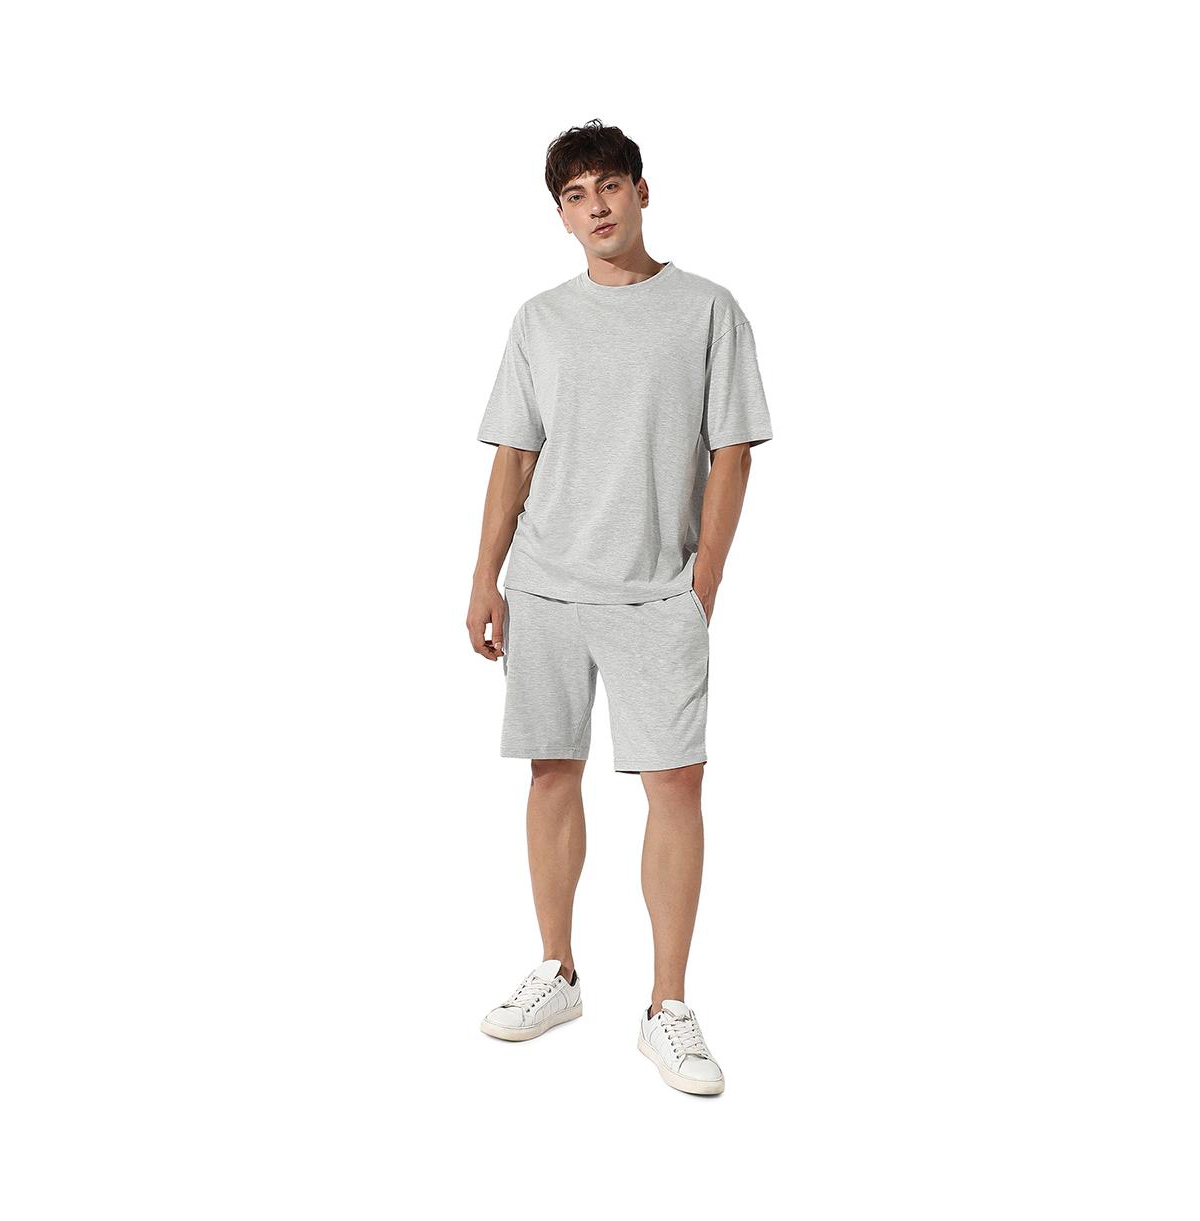 Campus Sutra Men's Oversized Solid Light Grey Casual Co-ord Set